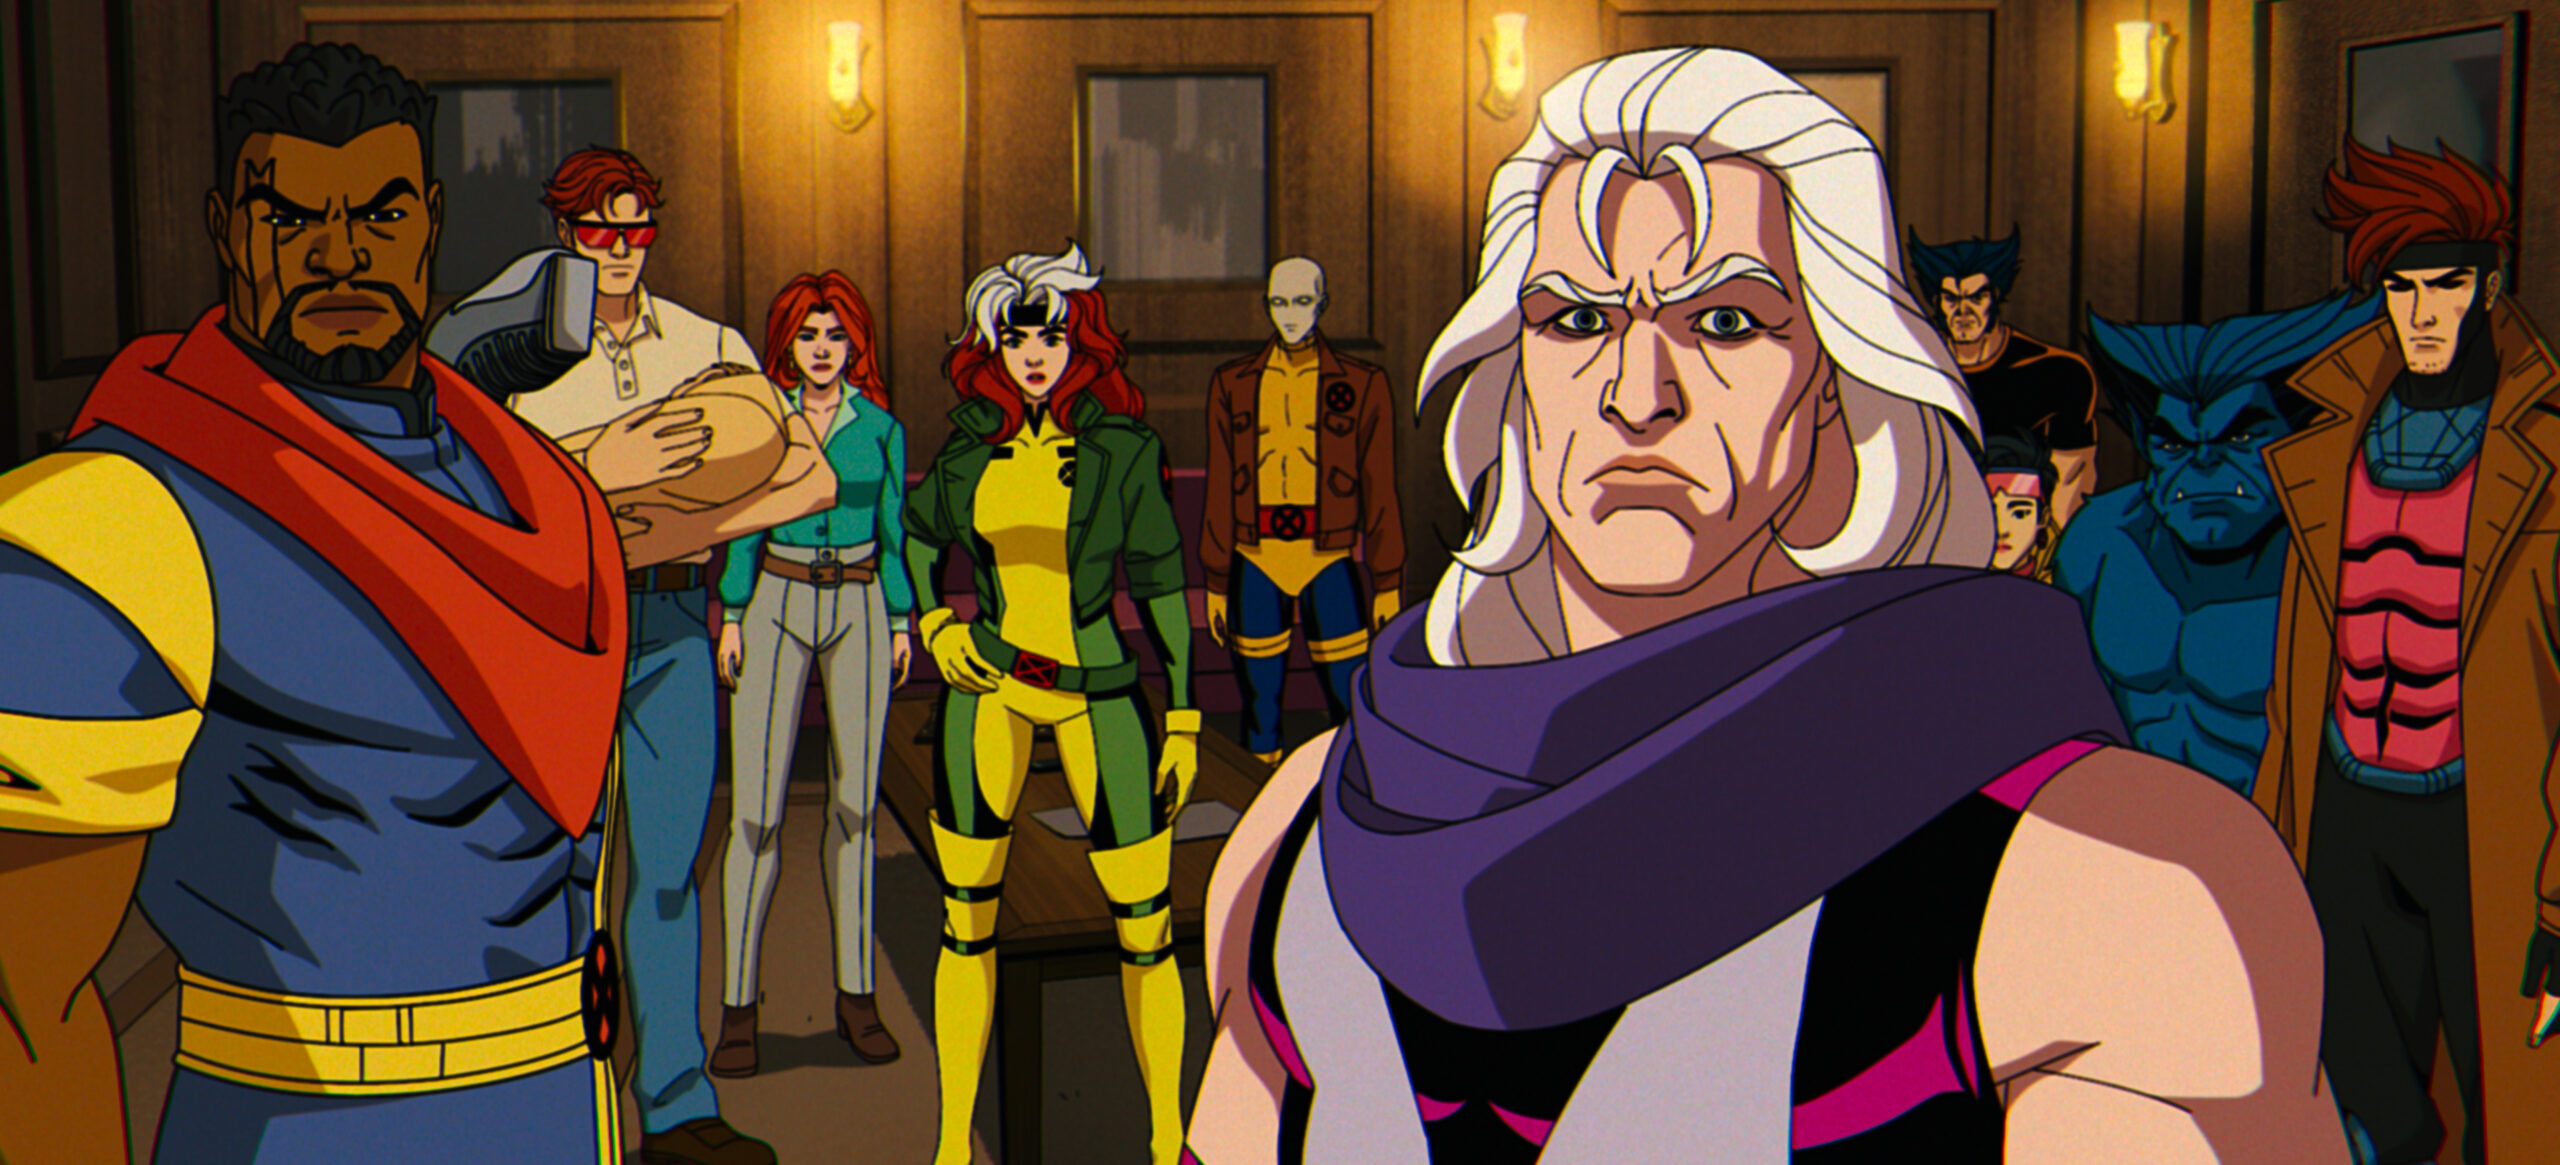 (L-R): Bishop (voiced by Isaac Robinson-Smith), Cyclops (voiced by Ray Chase), Jean Grey (voiced by Jennifer Hale), Rogue (voiced by Lenore Zann), Morph (voiced by JP Karliak), Magneto (voiced by Matthew Waterson), Wolverine (voiced by Cal Dodd), Jubilee (voiced by Holly Chou), Beast (voiced by George Buza), and Gambit (voiced by AJ LoCascio) in Marvel Animation's X-MEN '97. Photo courtesy of Marvel Animation. © 2024 MARVEL.